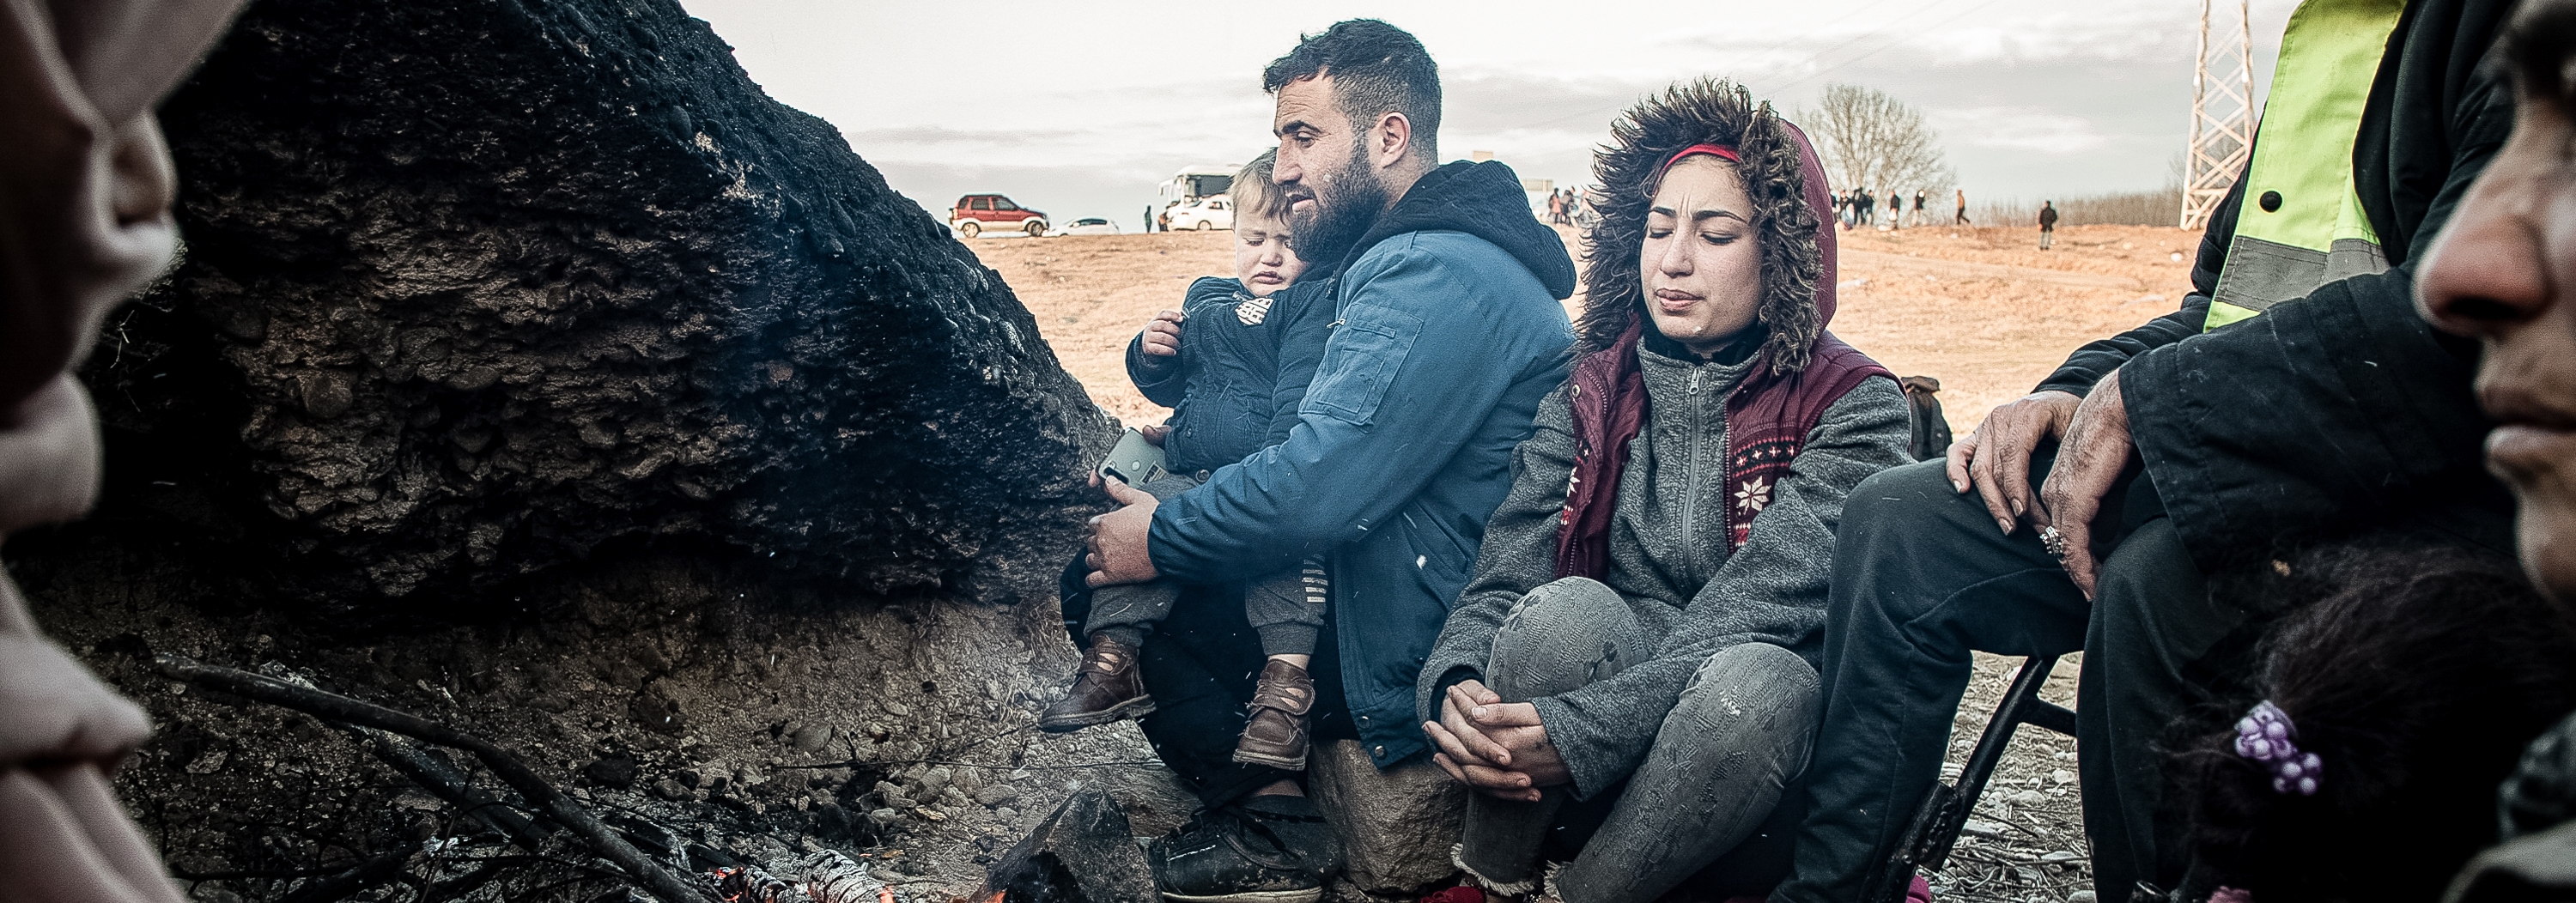 A Syrian family huddles by a fire out of the wind while children gather branches to burn Saturday night as they deliberate how to get home after a failed crossing attempt at the Edirne border with Greece. ©IOM 2020/Emrah Özesen.